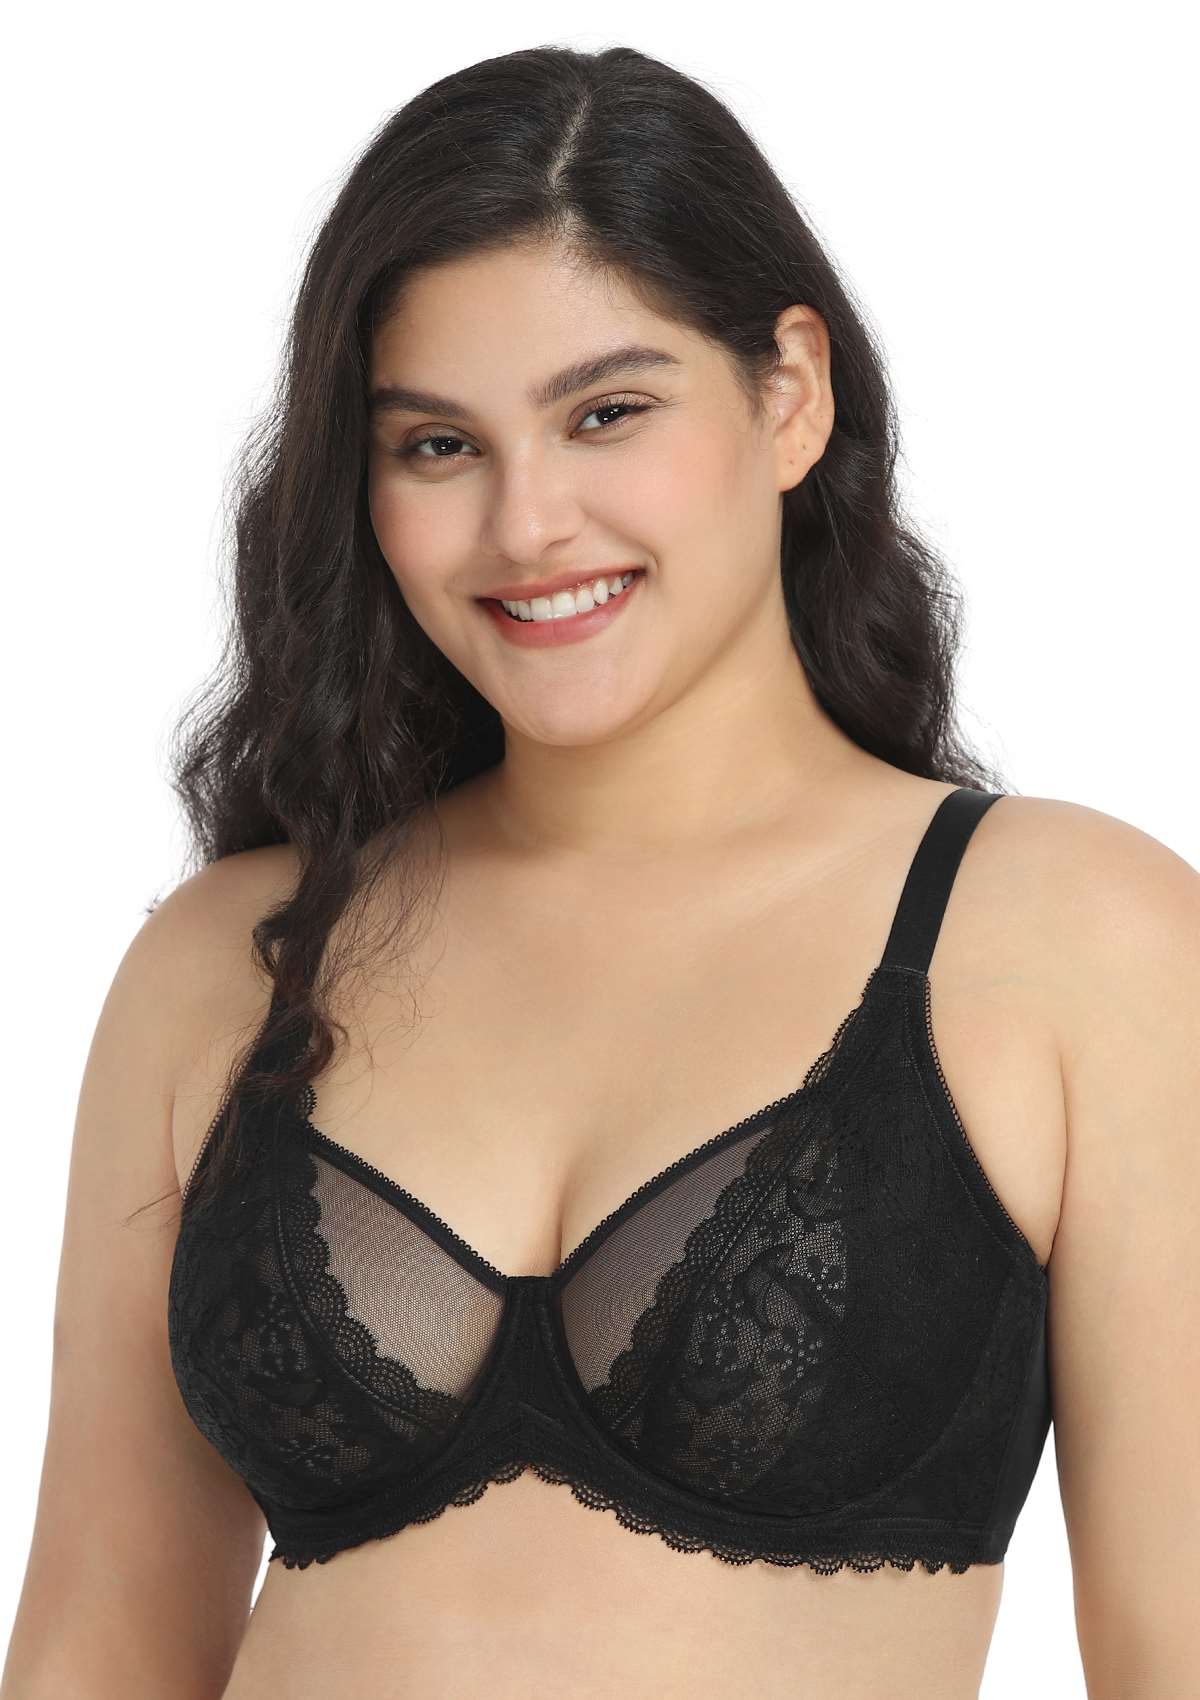 HSIA Anemone Big Bra: Best Bra For Lift And Support, Floral Bra - Black / 34 / C